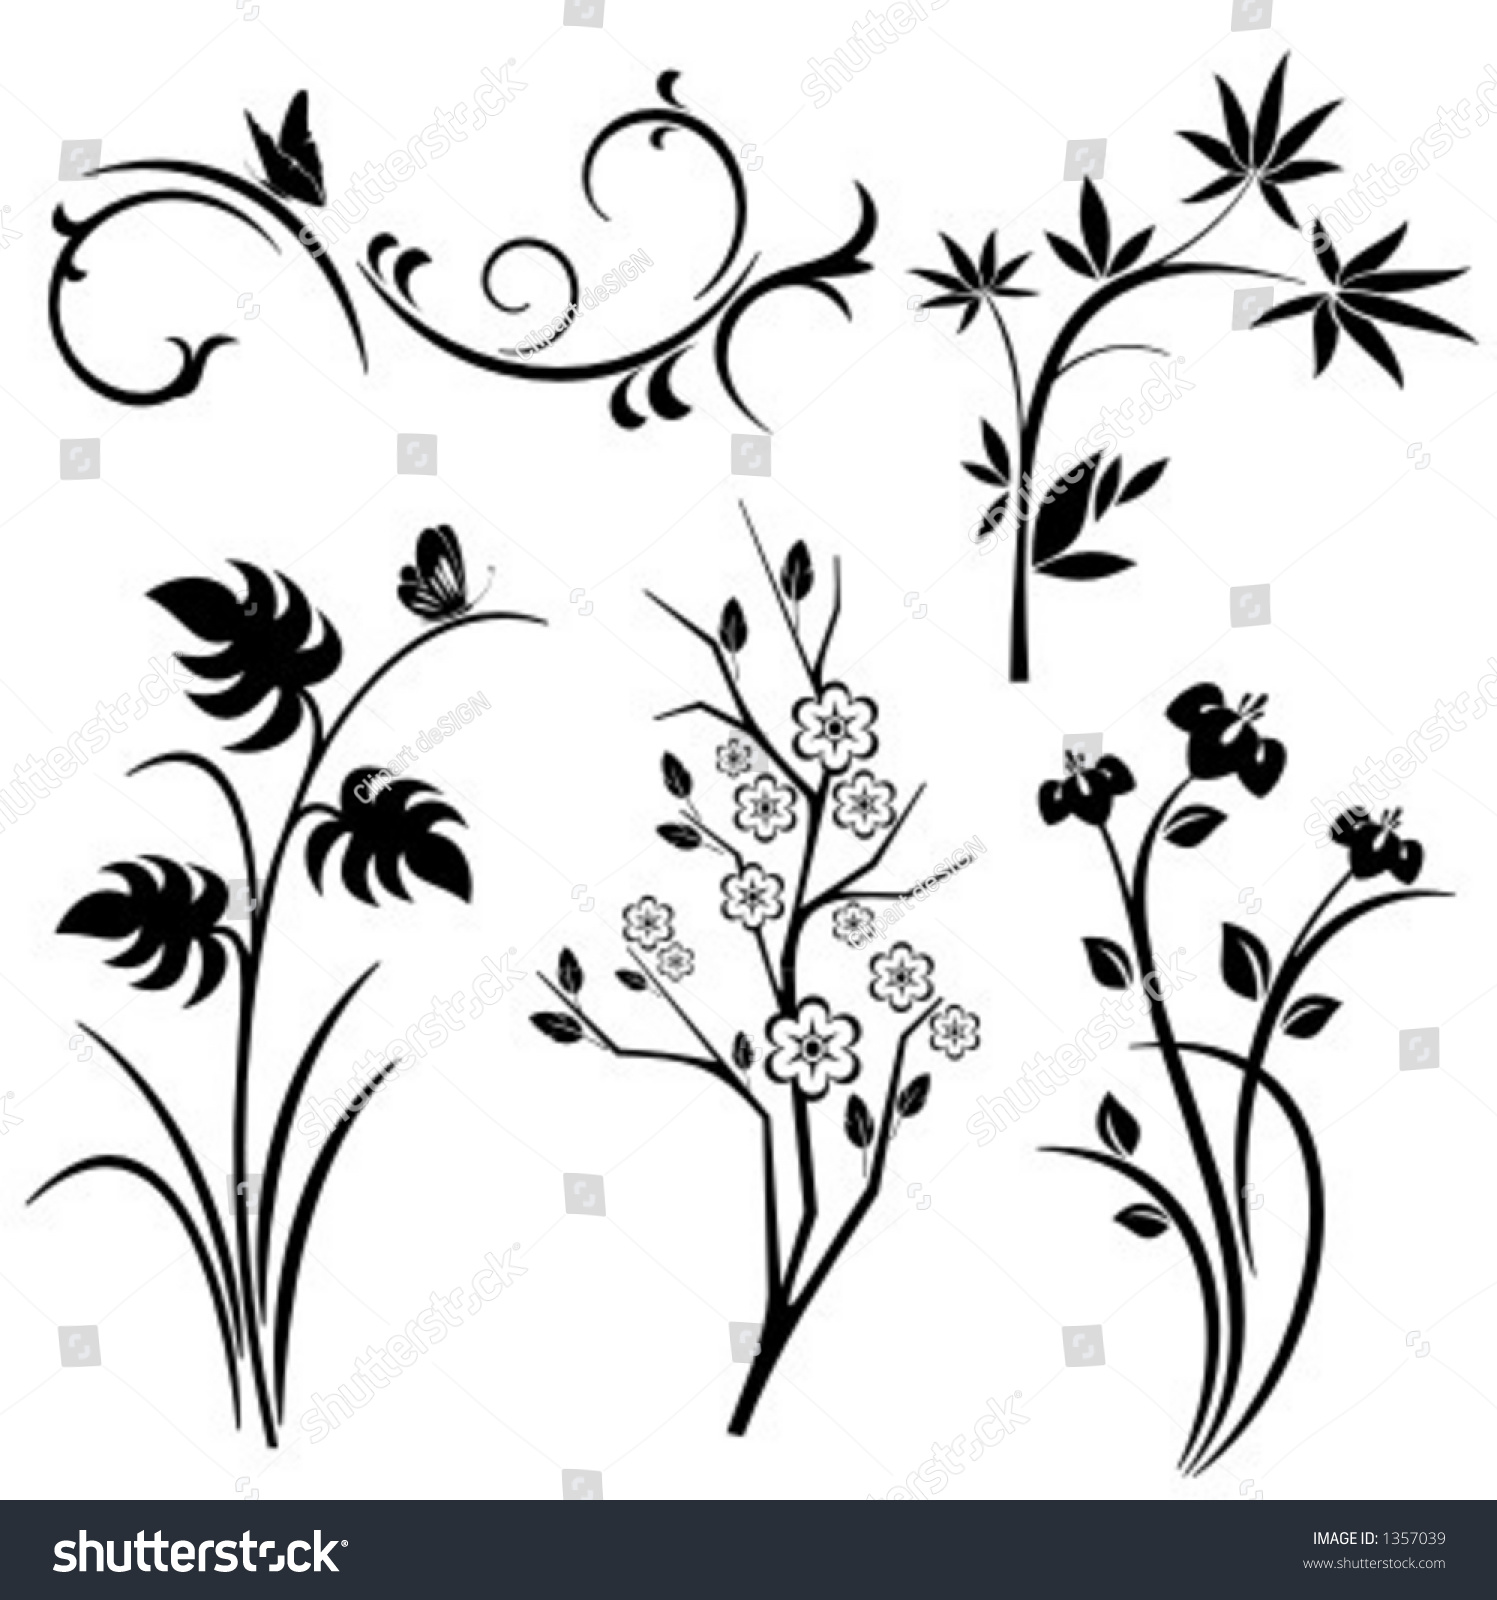 A Set Of 5 Japanese Floral Designs. Stock Vector 1357039 : Shutterstock